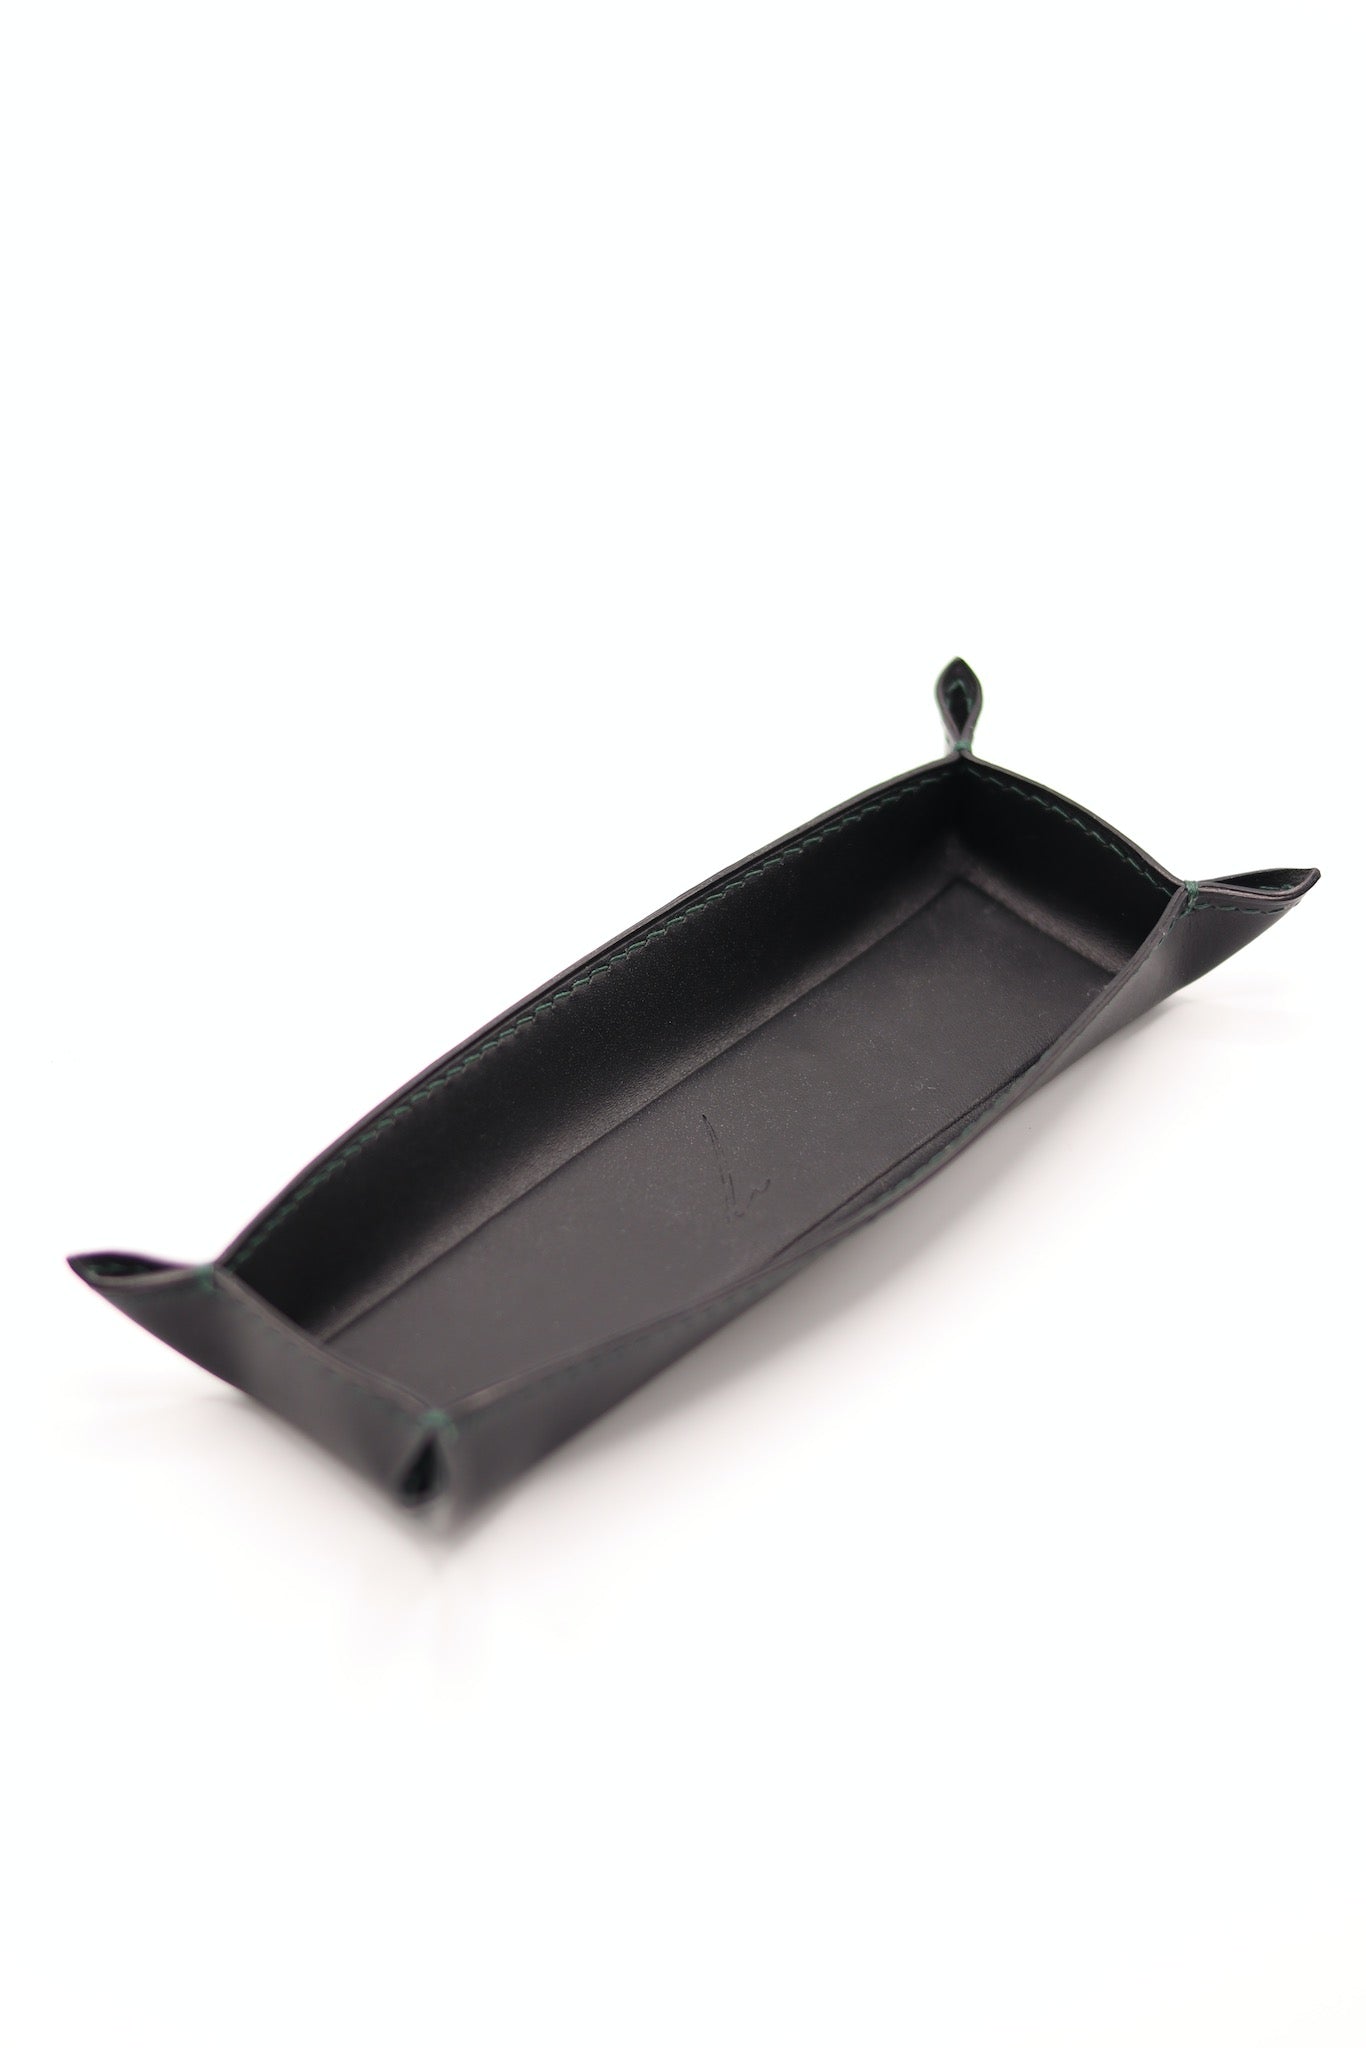 Luxury Leather Stationary Pen Tray For Desk